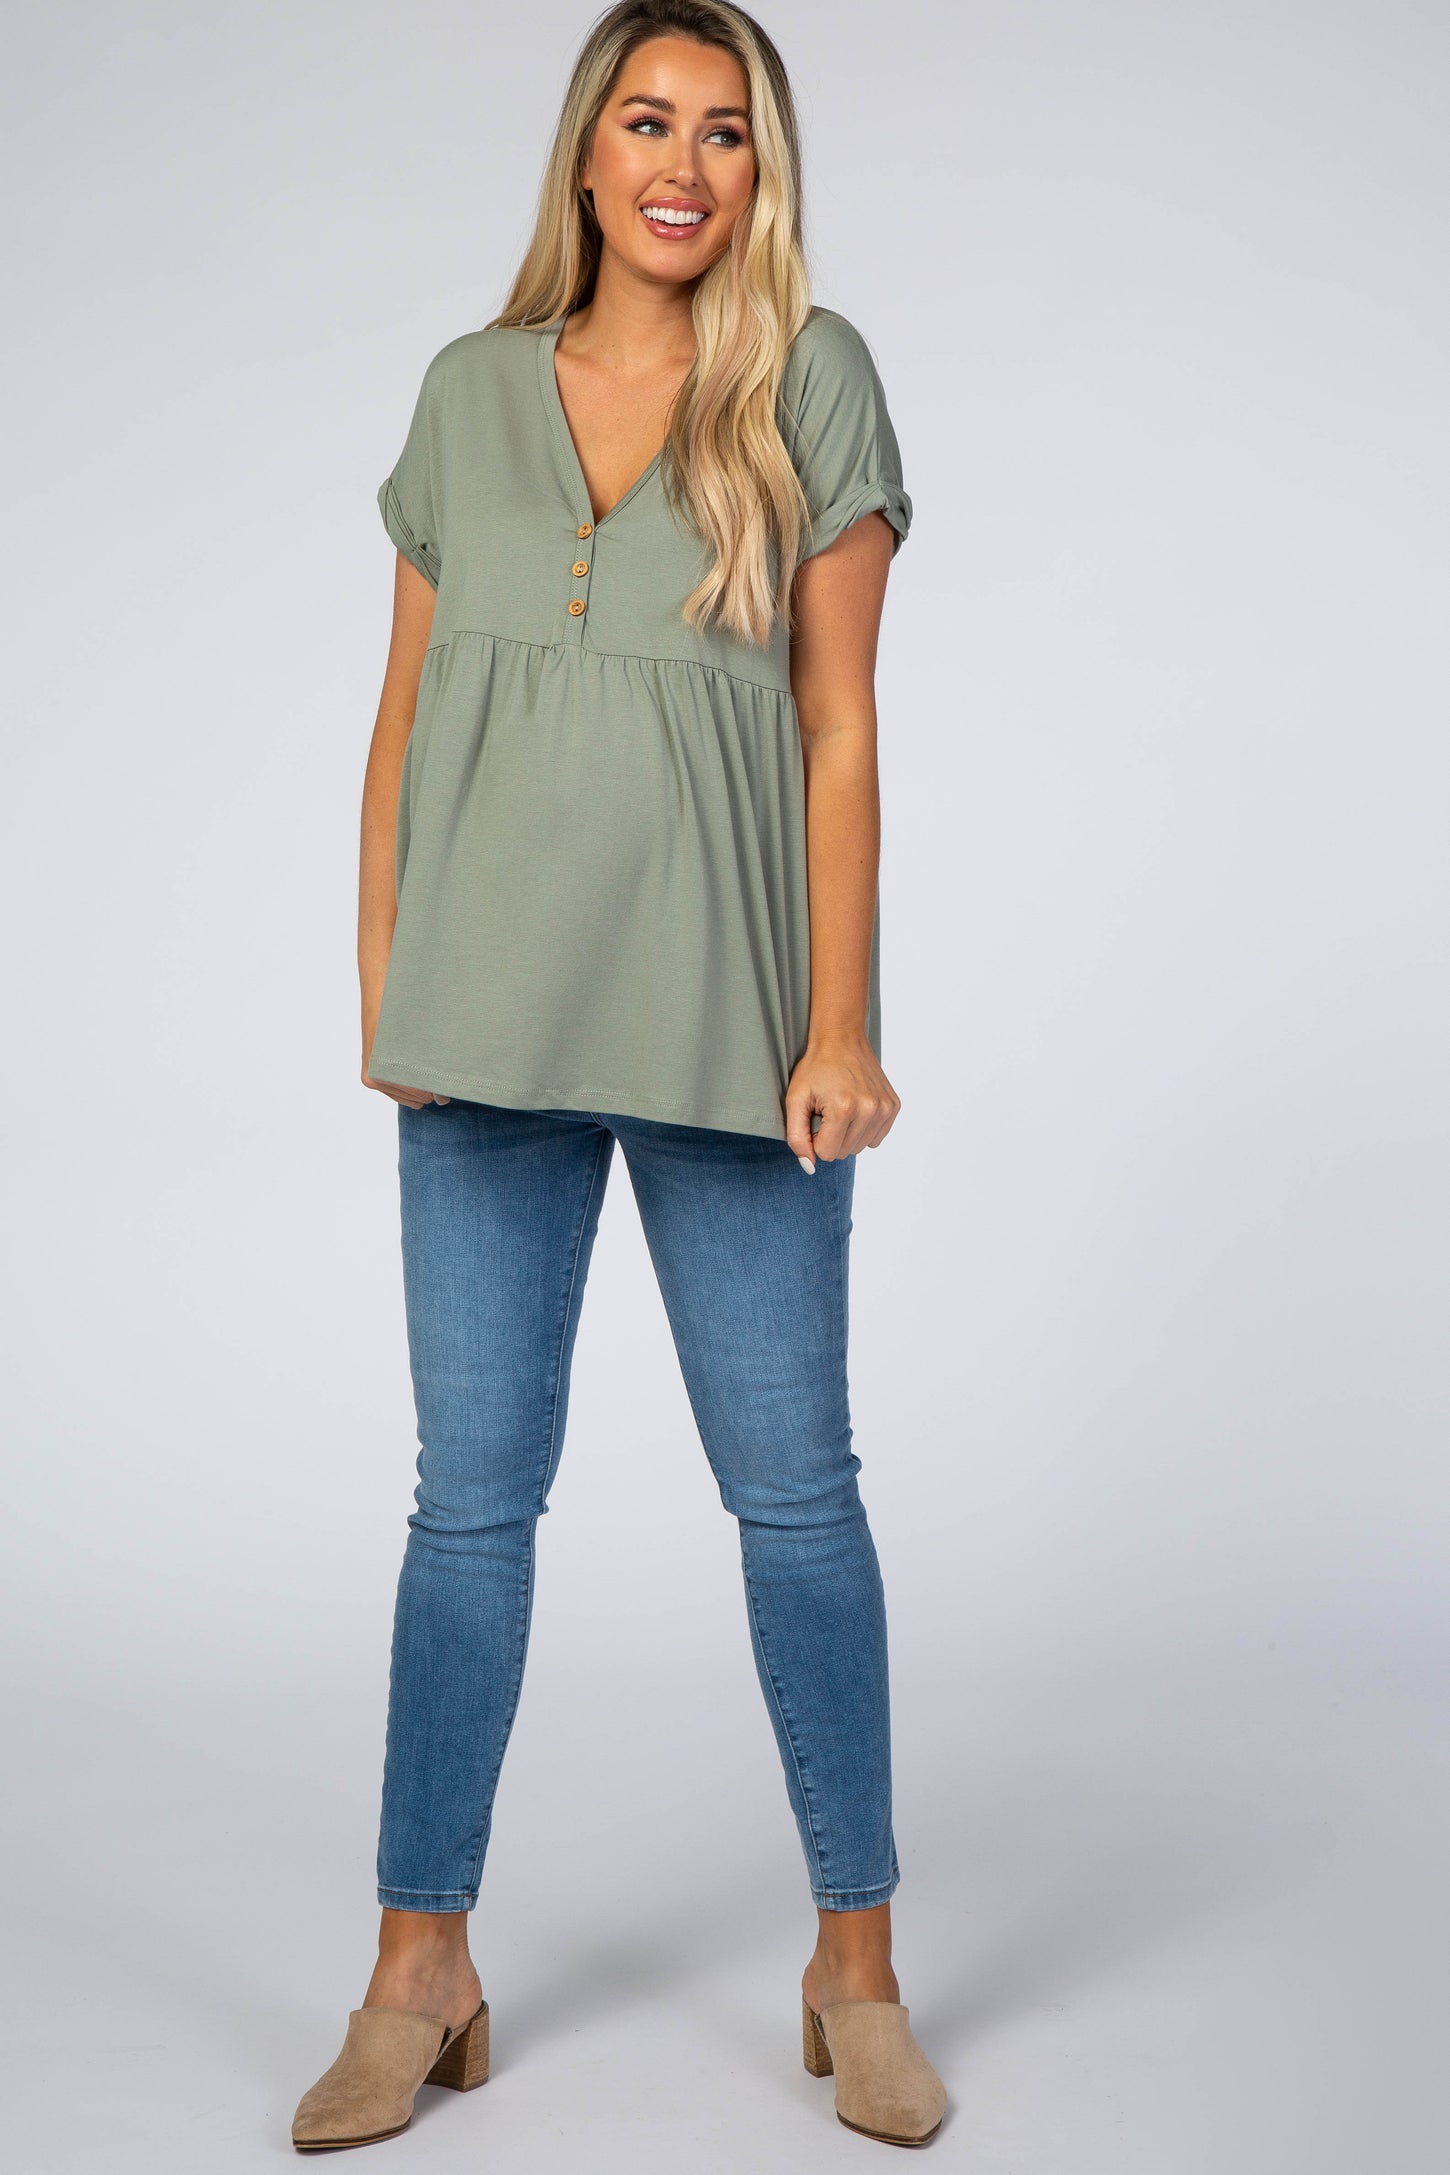 Olive Boxy Button Front Short Sleeve Maternity Top